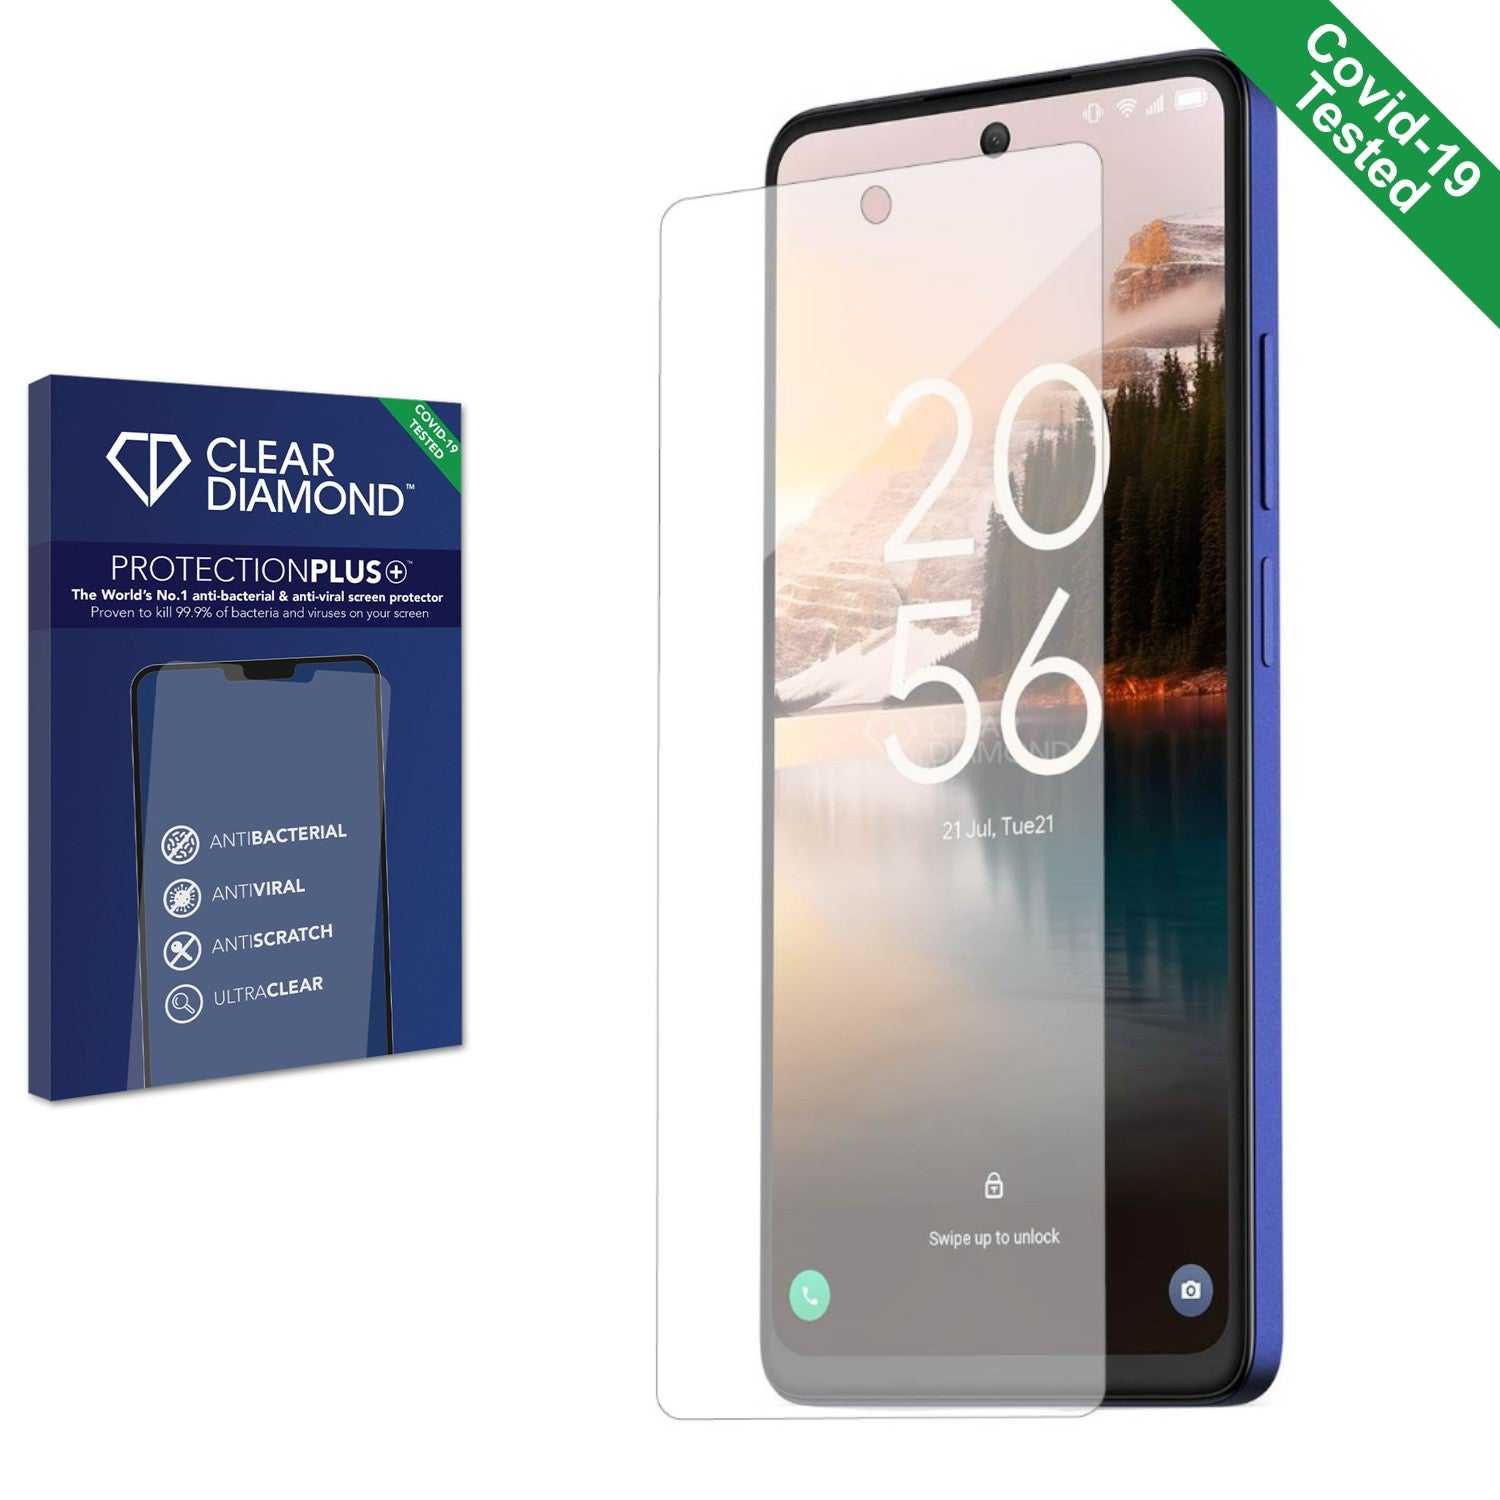 ScreenShield, Clear Diamond Anti-viral Screen Protector for TCL 40 NXTPAPER